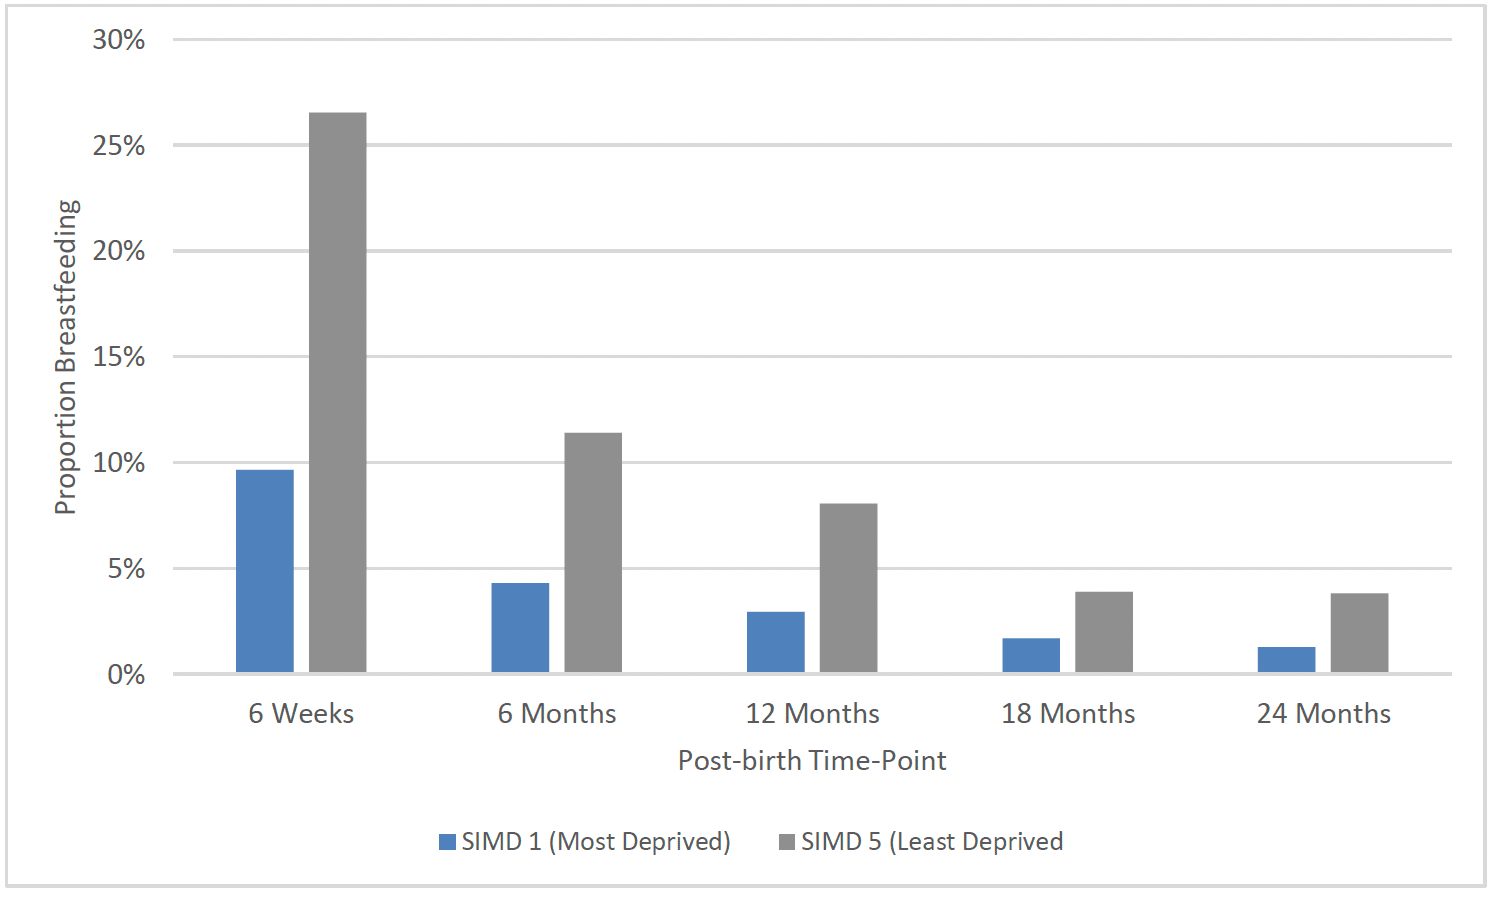 Chart 37 shows the proportion of FNP clients breastfeeding at 6 weeks, 6 months, 12 months, 18 months and 24 months post-birth in SIMD 1 (Most deprived) and SIMD 5 (Least Deprived). At each time-point those in the least deprived areas were more likely to breastfeed.